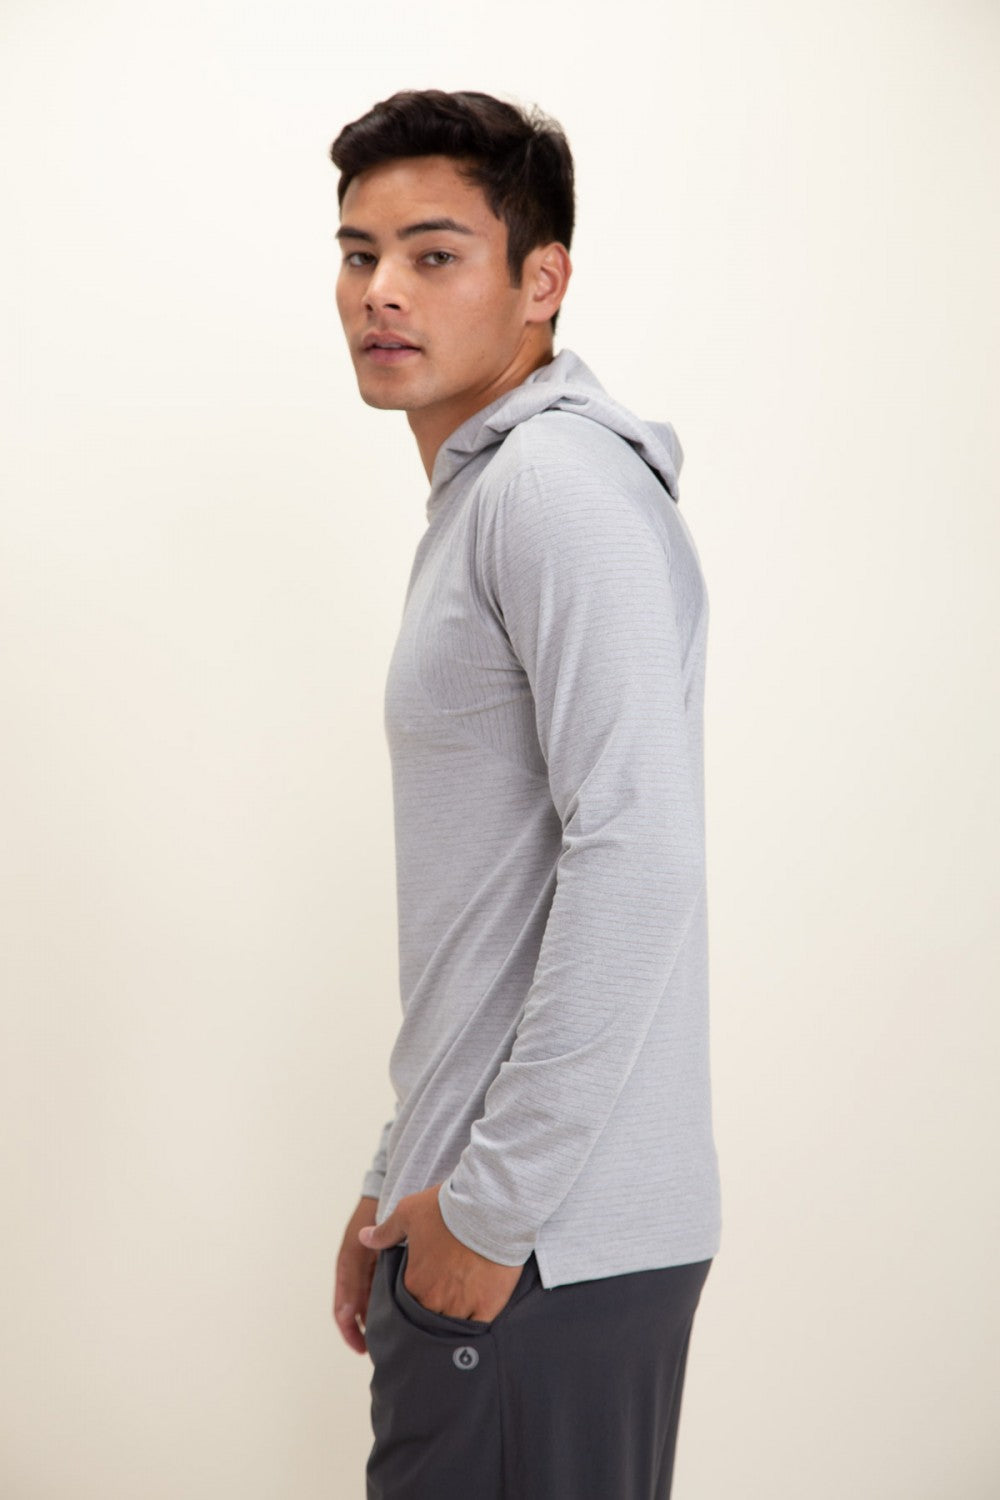 Hooded Move Pullover - Men's